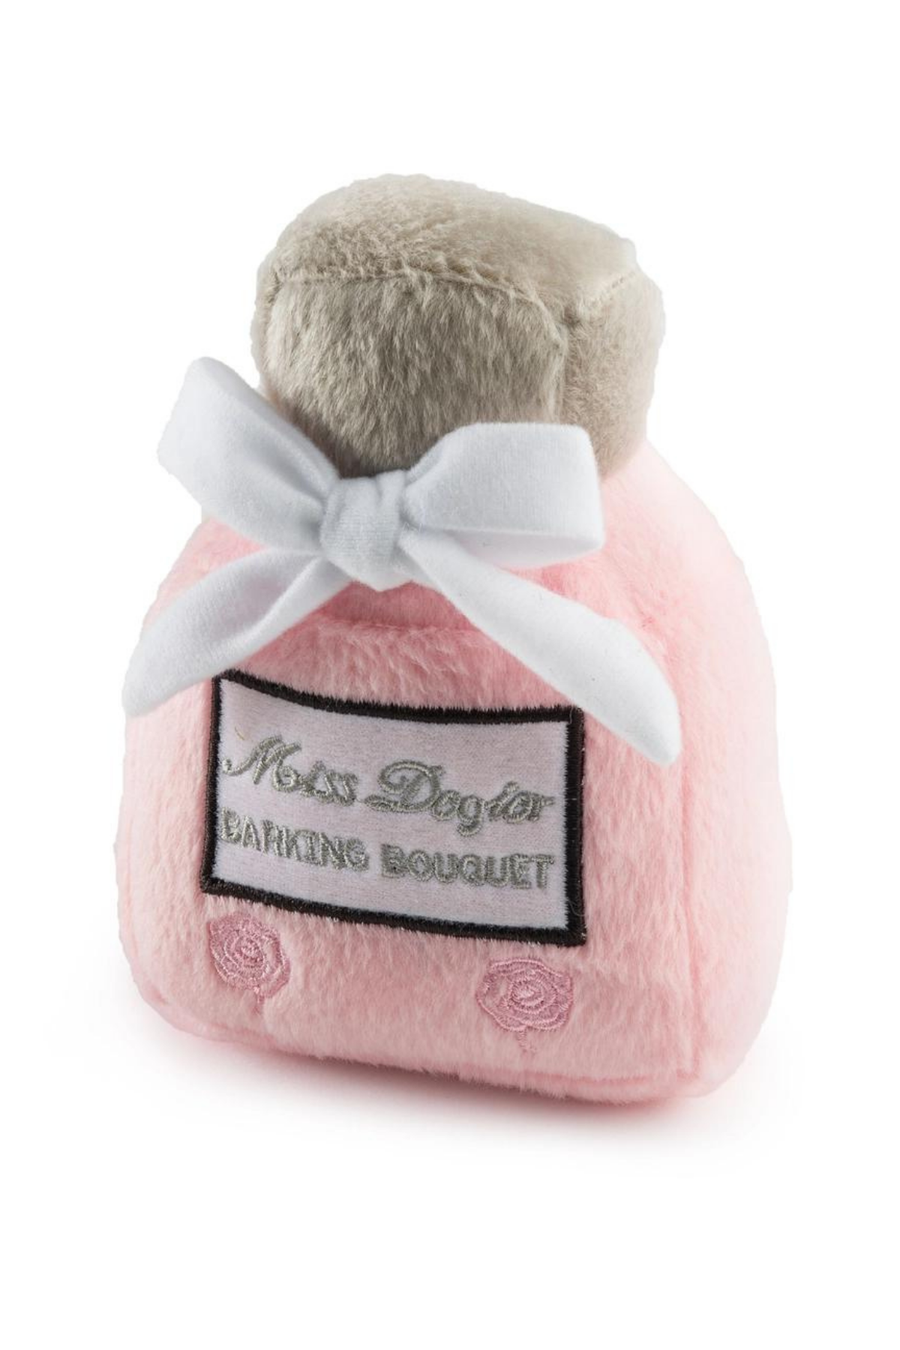  Miss Dogior Perfume Bottle - Madison and Mallory